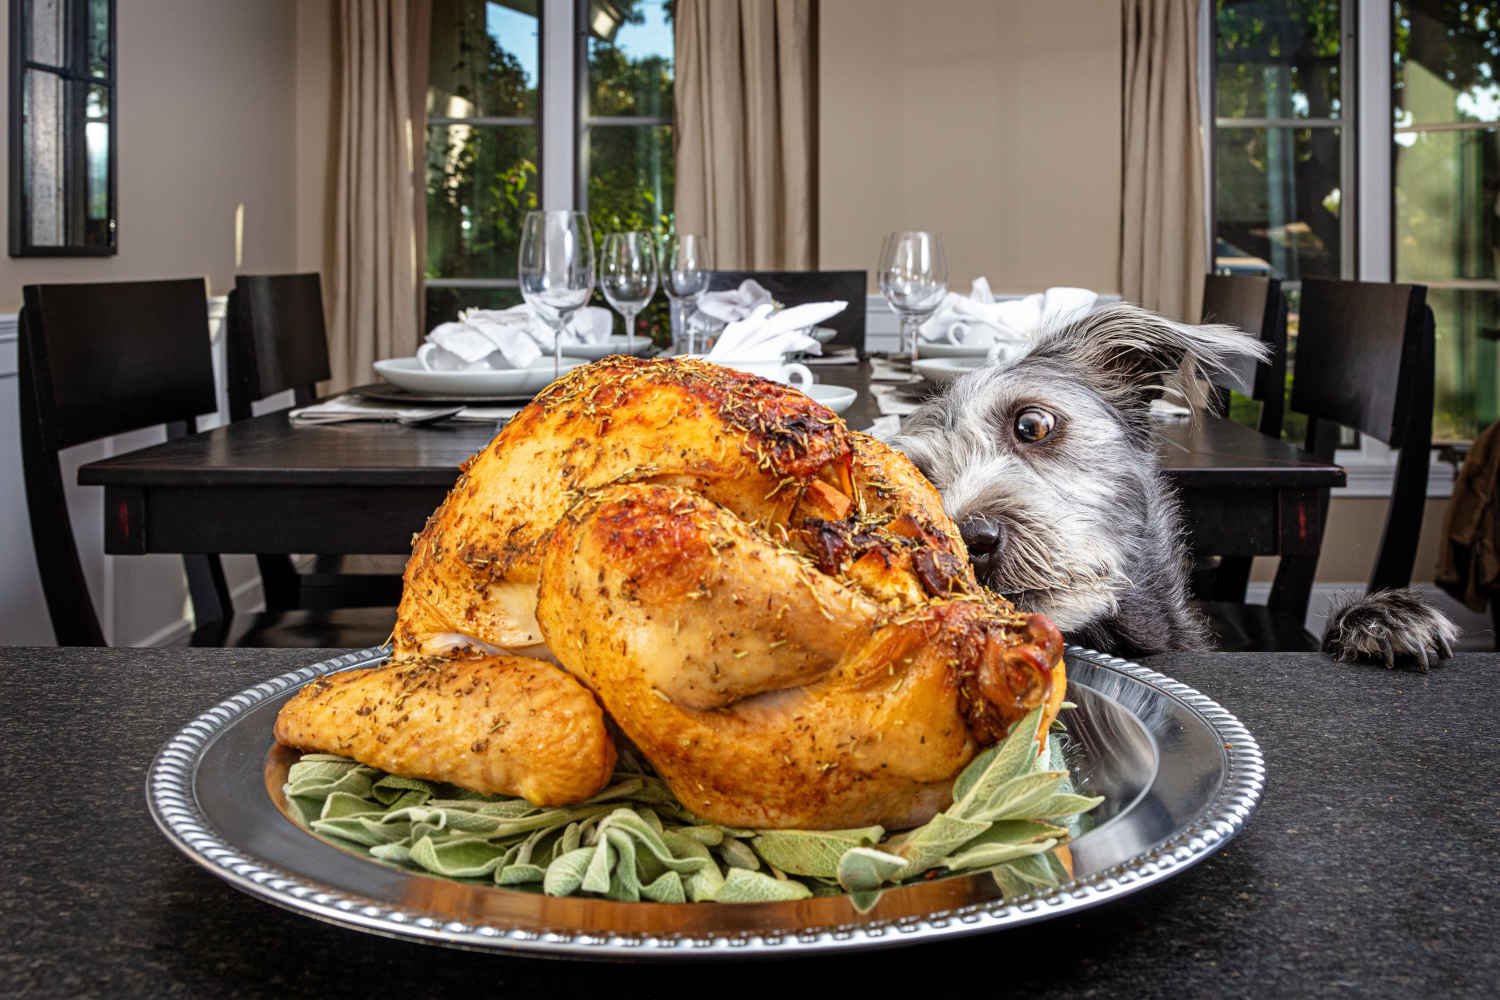 A shaggy gray dog looking at a cooked whole turkey with excited eyes.